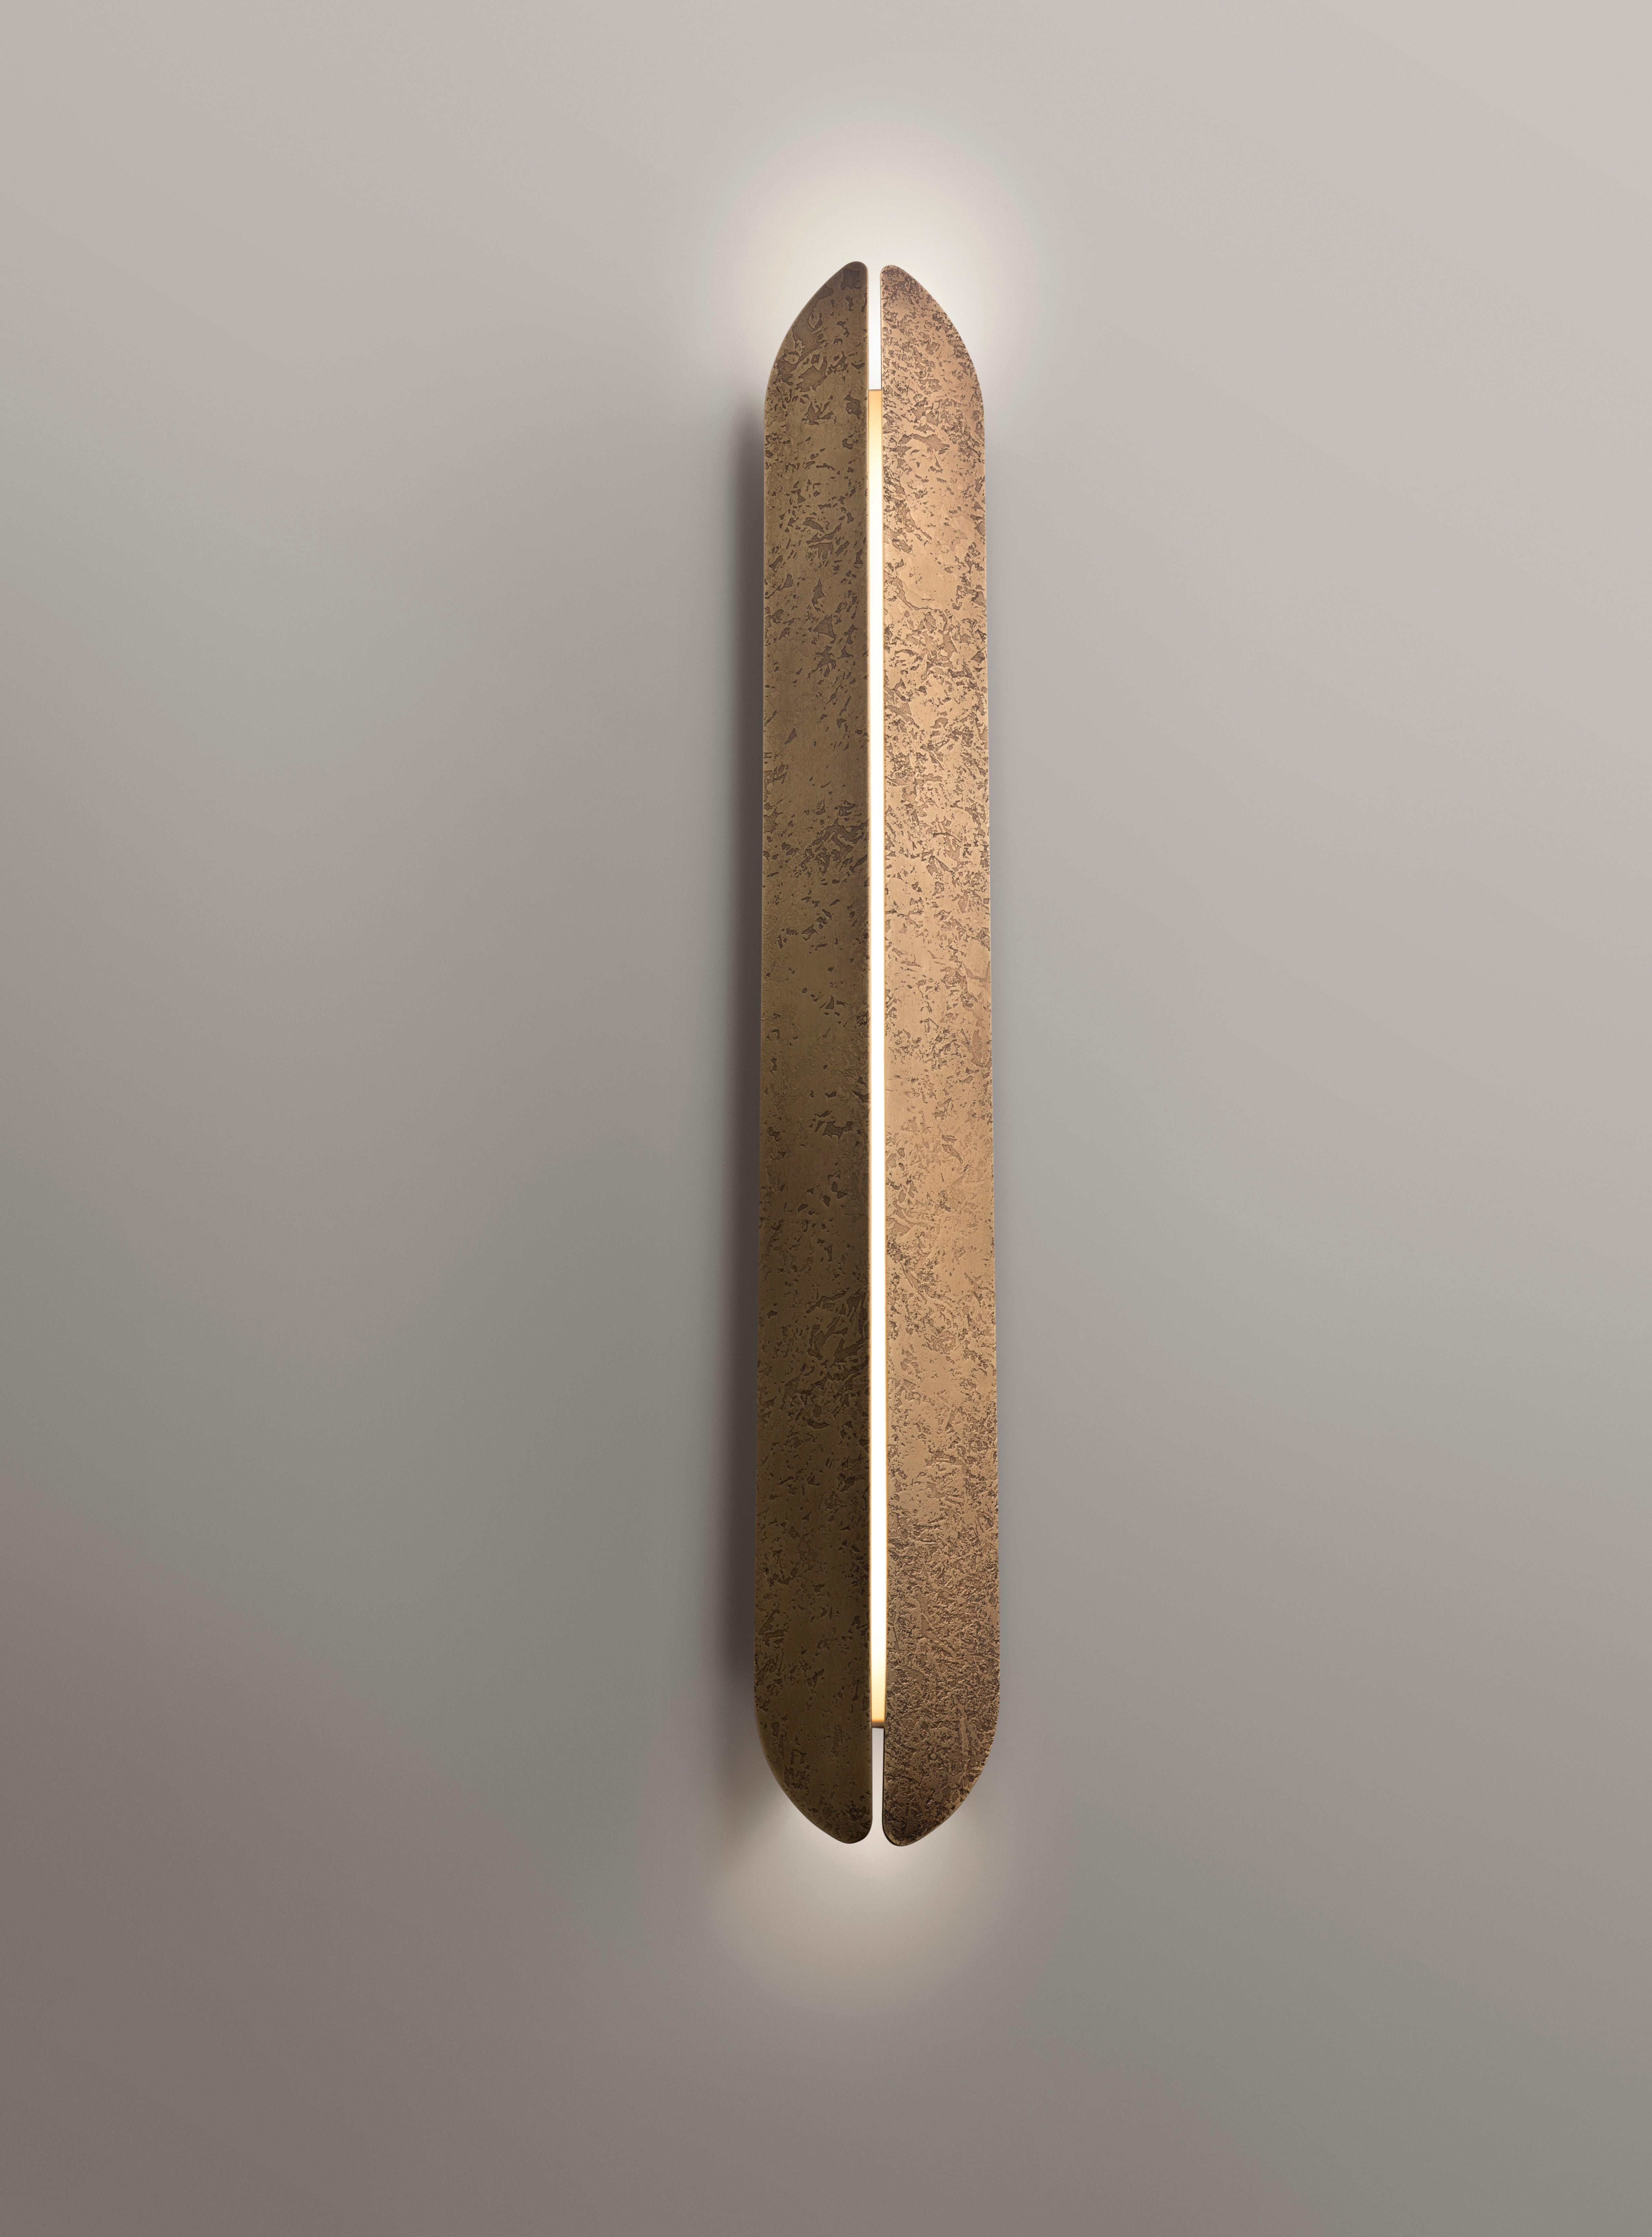 Modern DeCastelli Aare Large LED Wall Light in H8 Brass by Alexander Purcell Rodrigues For Sale